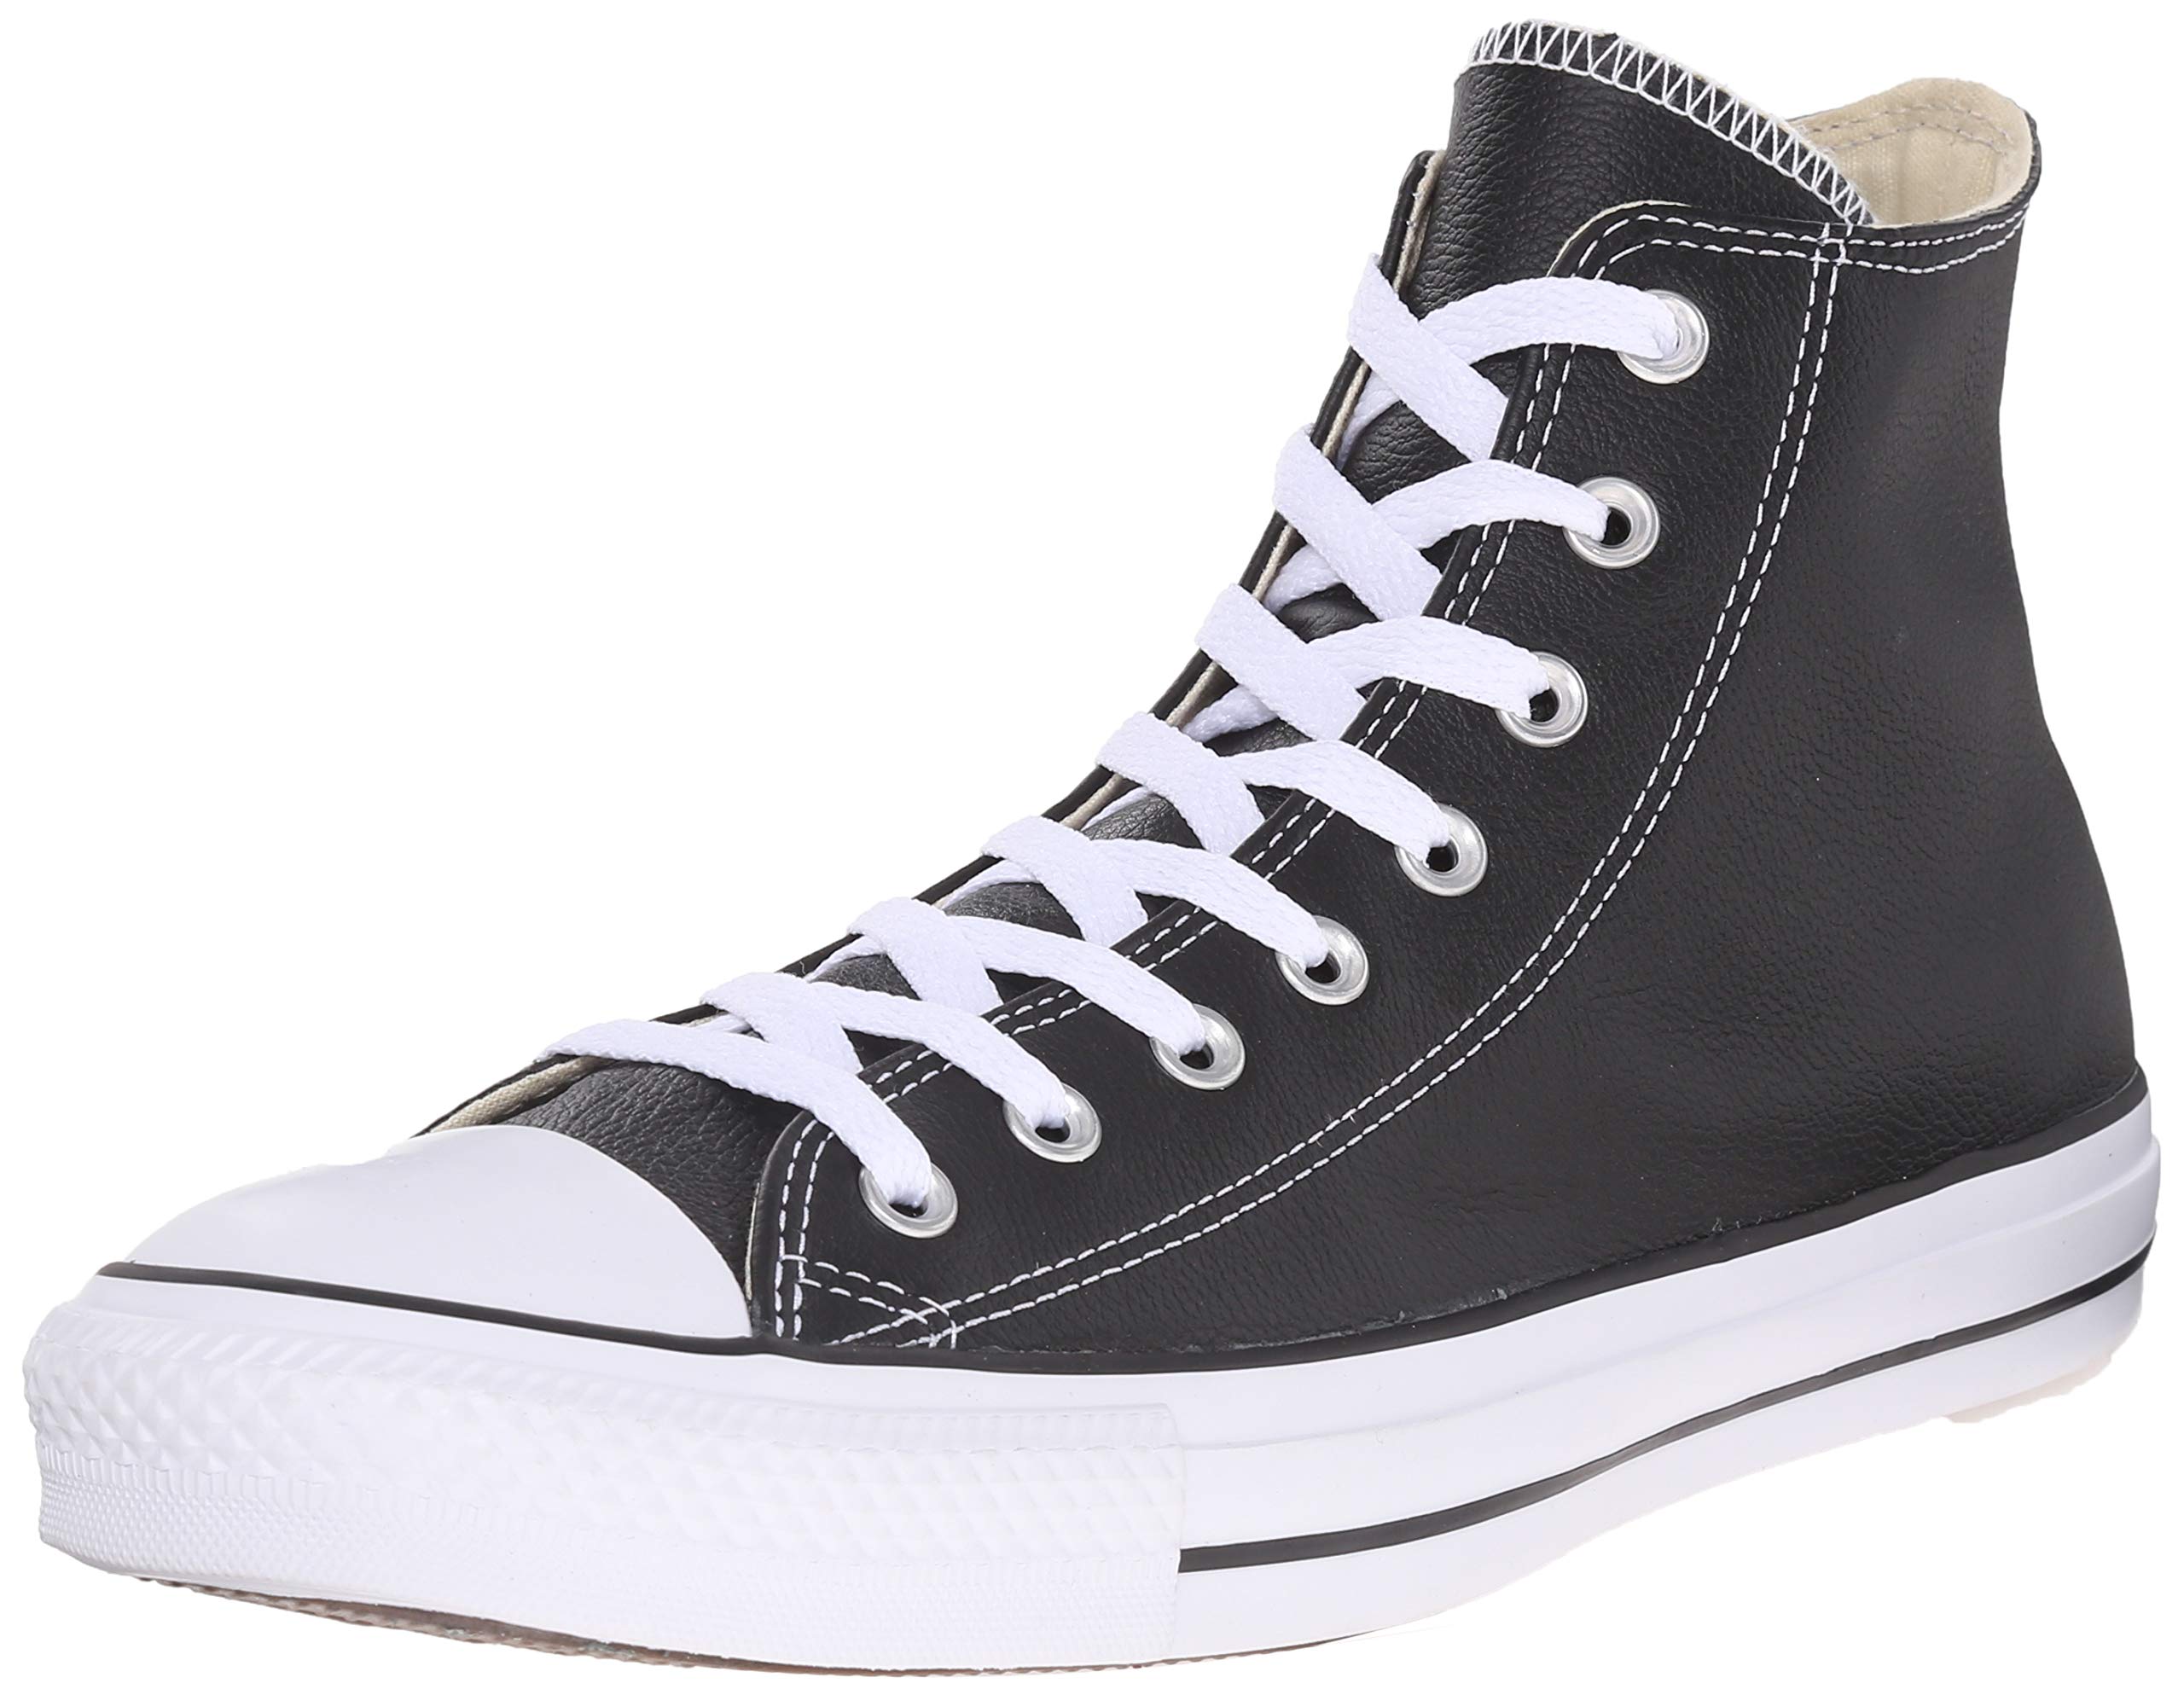 Converse Chuck Taylor All Star Hi Leather Sneakers Black - image 1 of 8